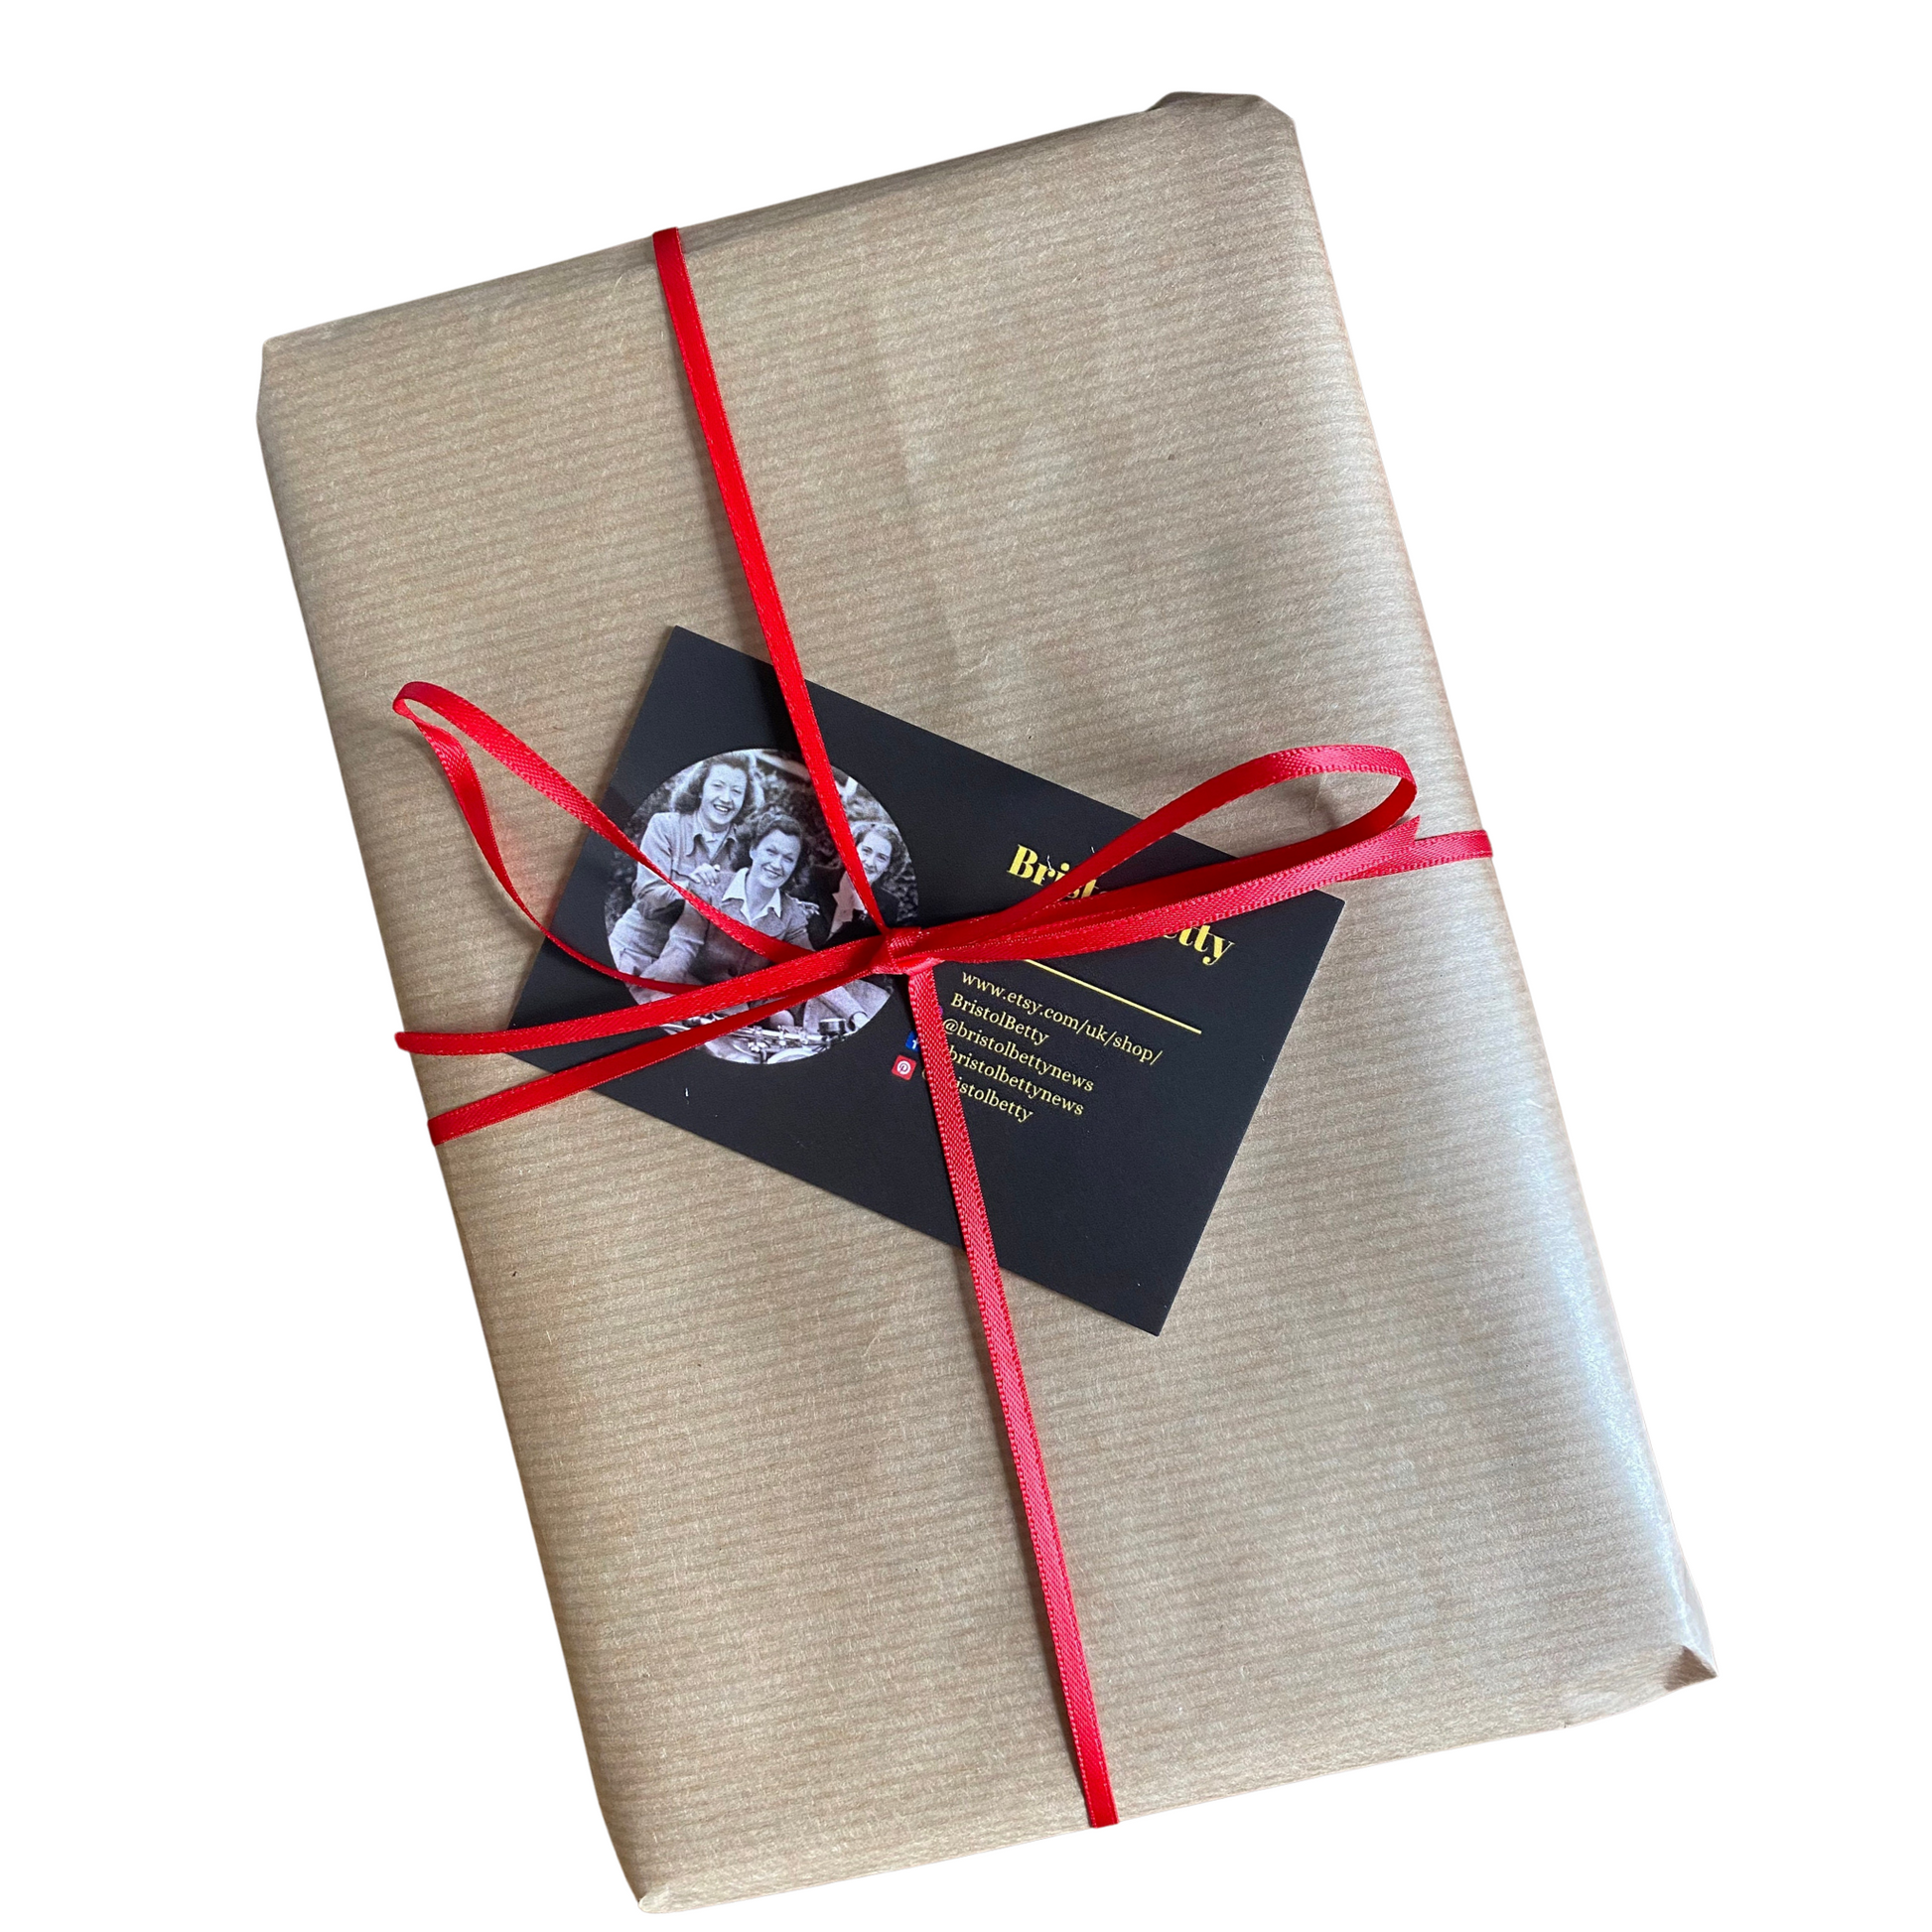 All books are wrapped in brown Kraft paper and ribbon 